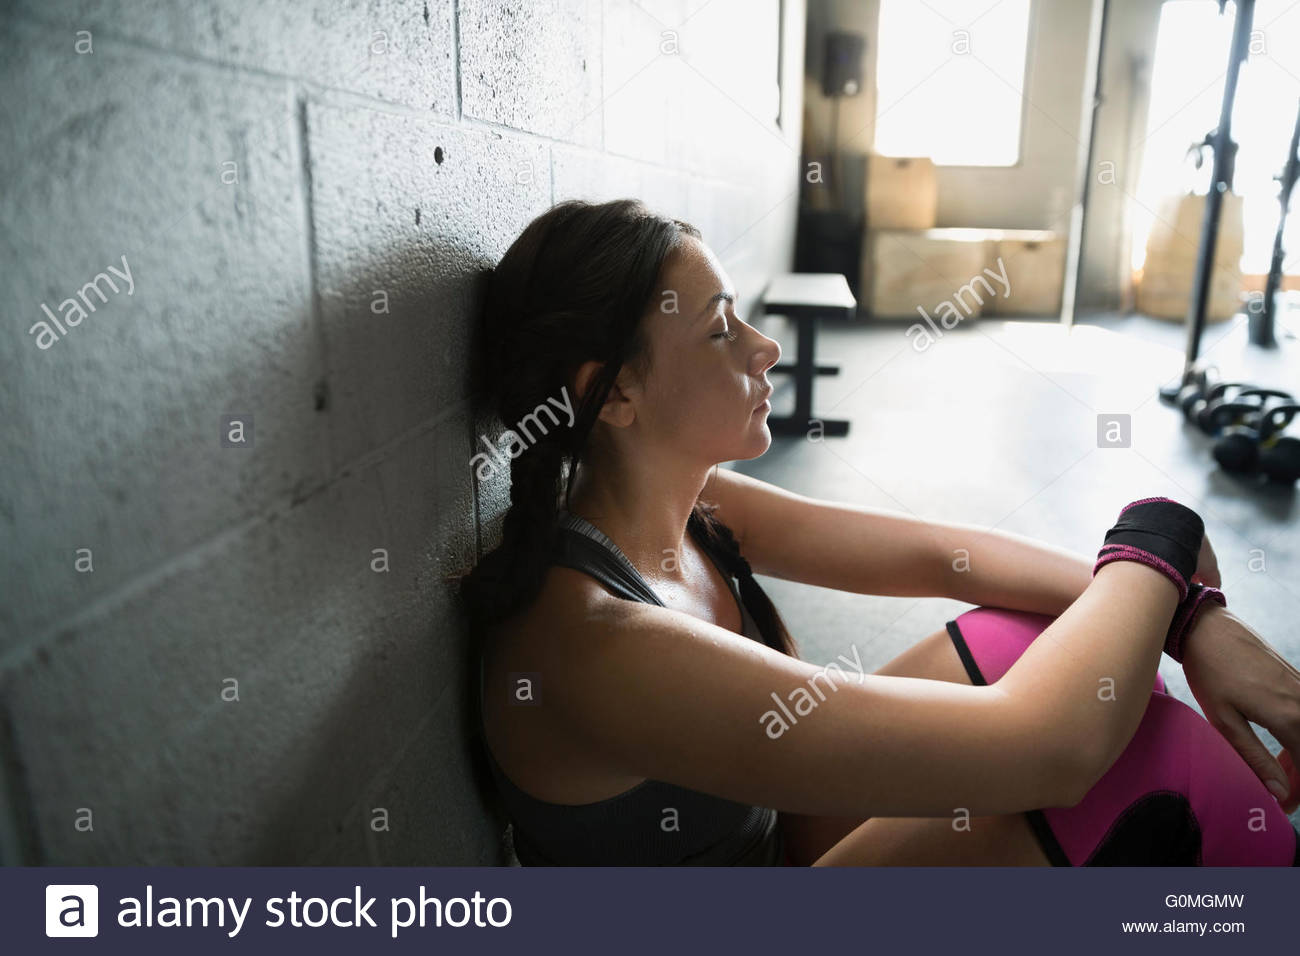 Tired woman resting at gym Stock Photo